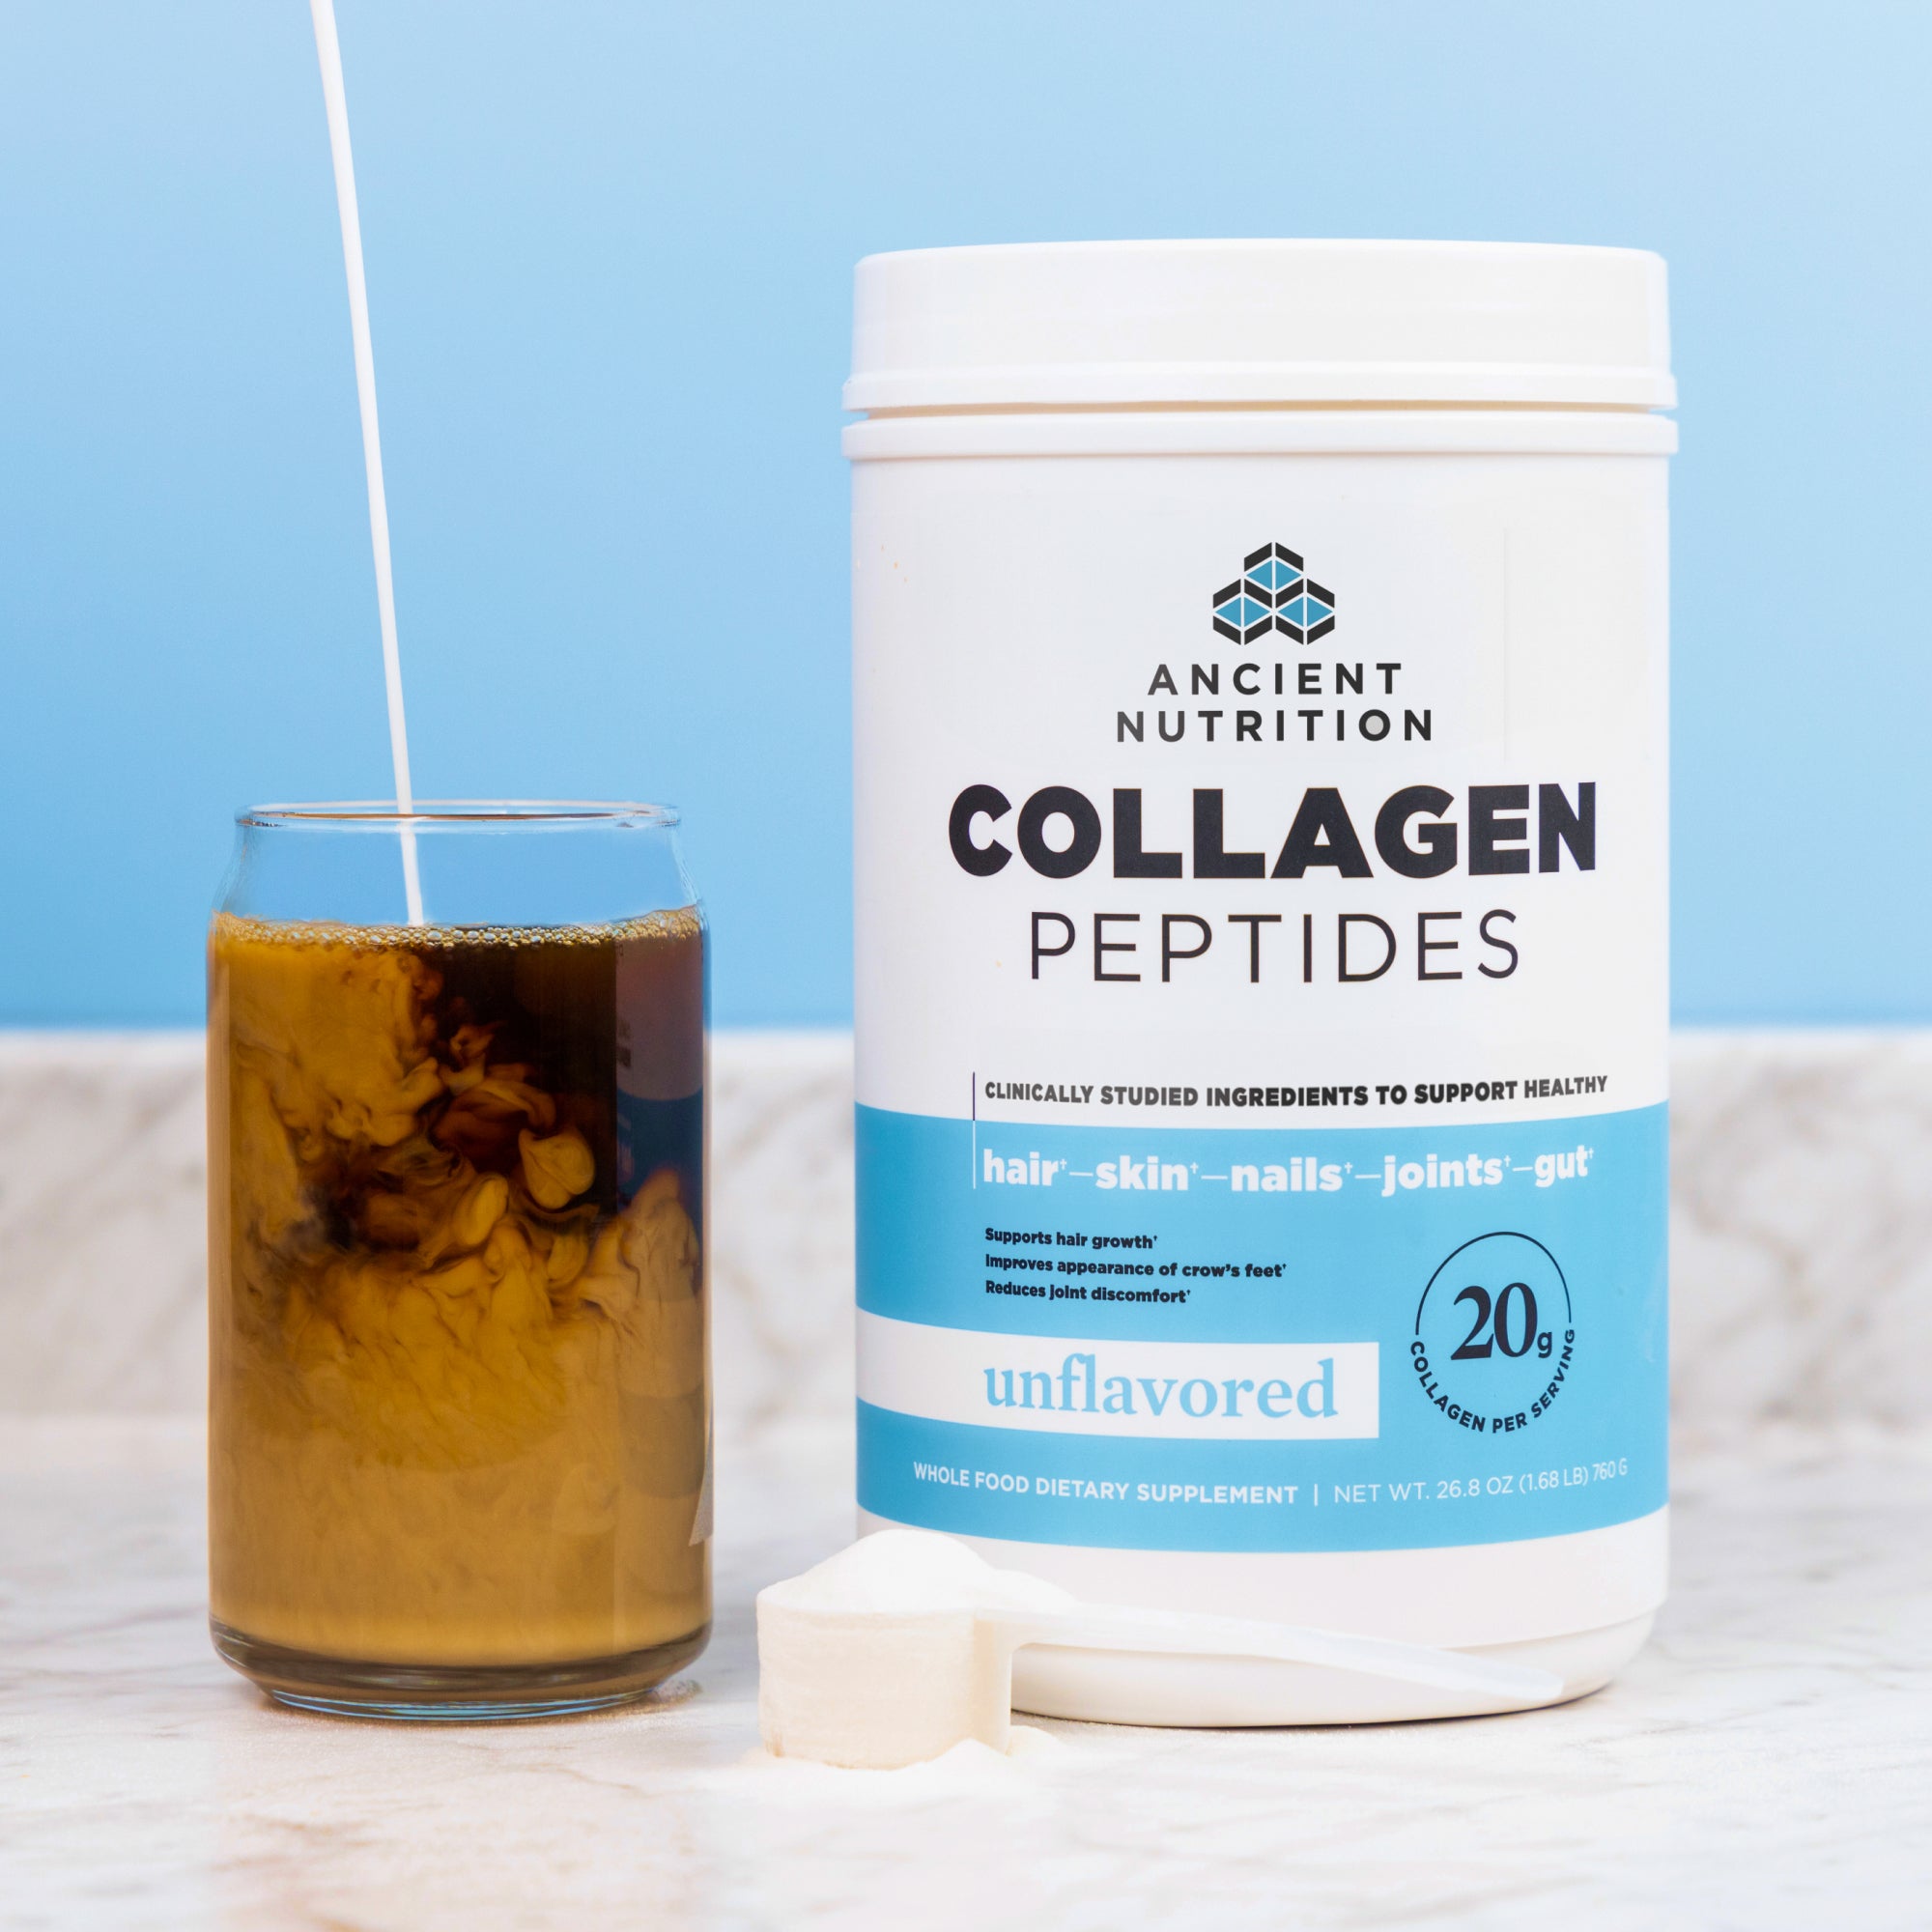 iced coffee in a glass cup next to a bottle of collagen peptides